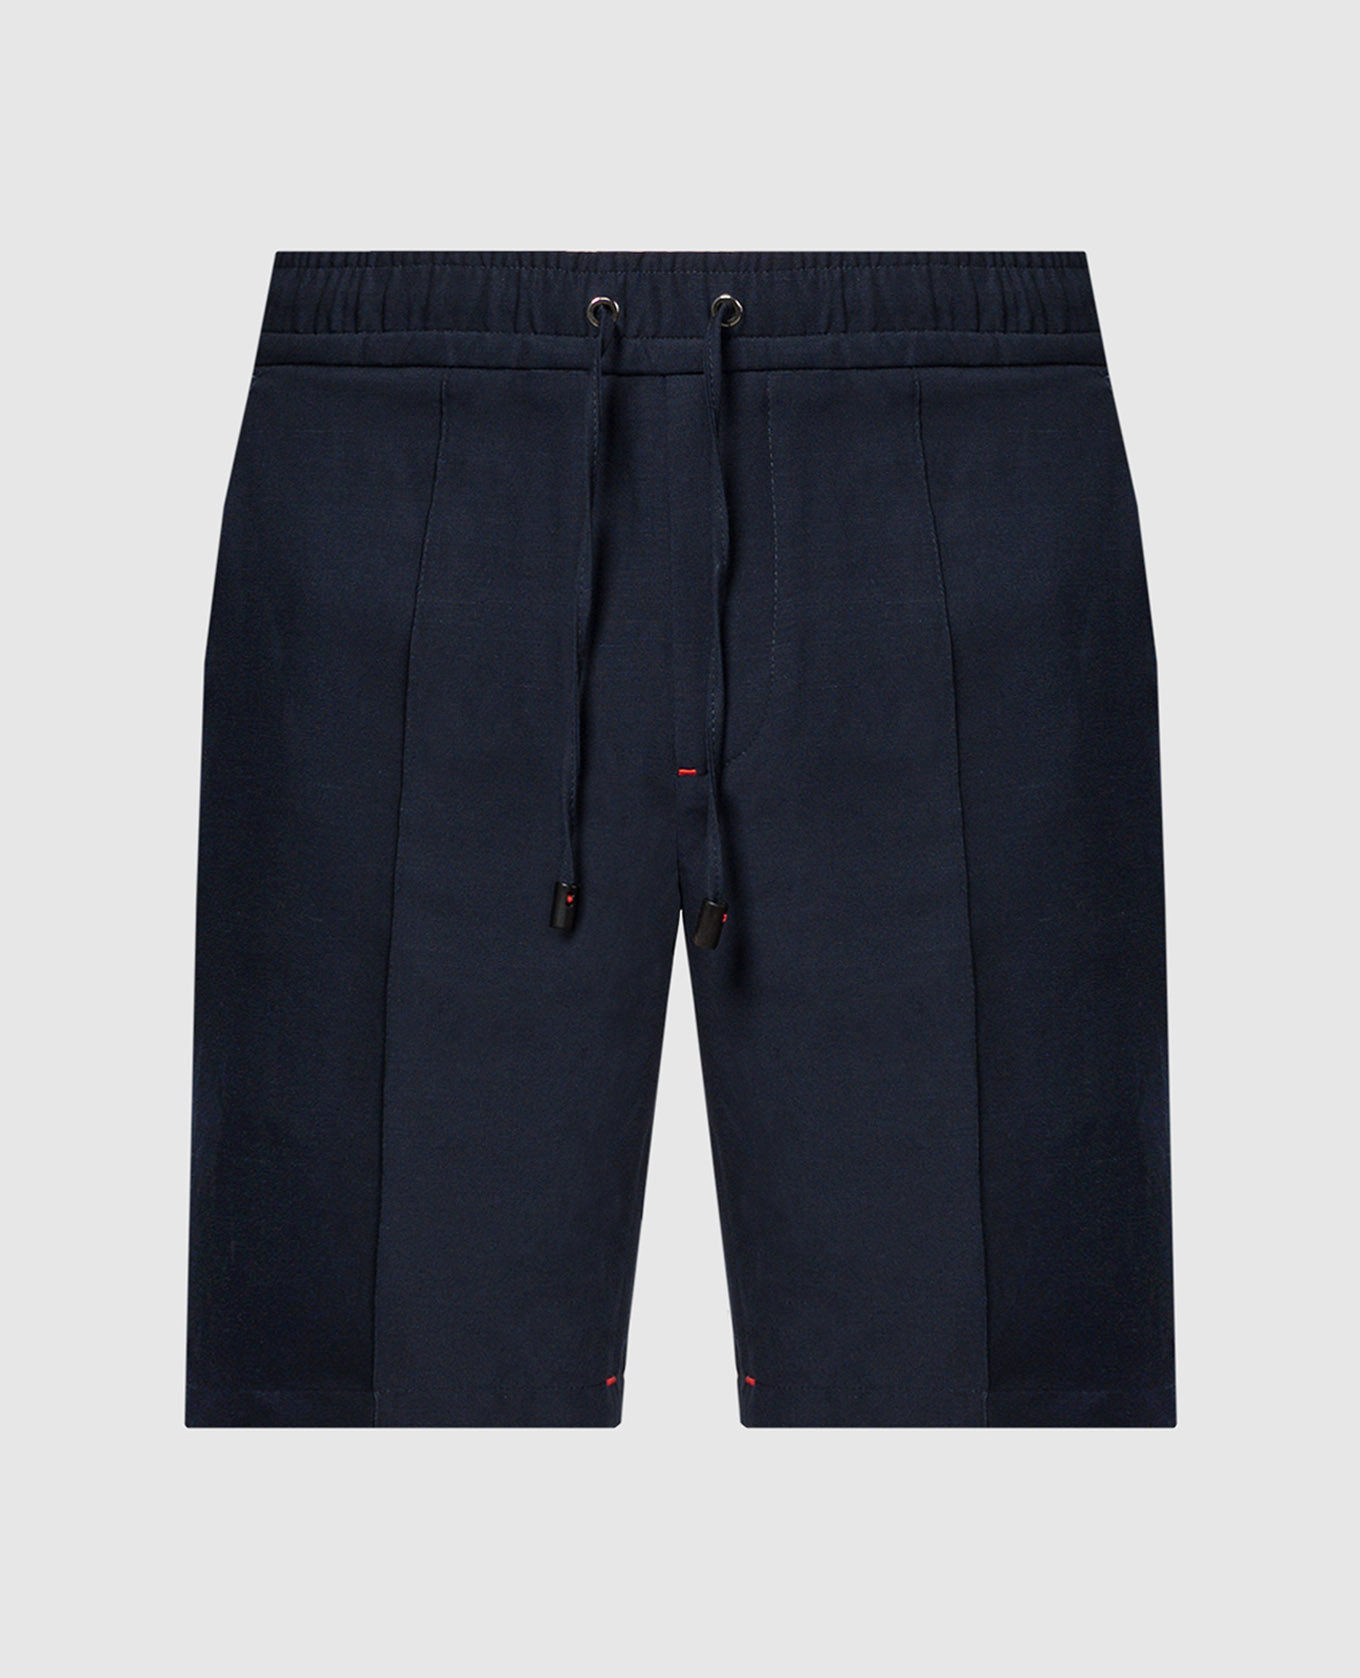 Blue wool and linen shorts with embroidered logo